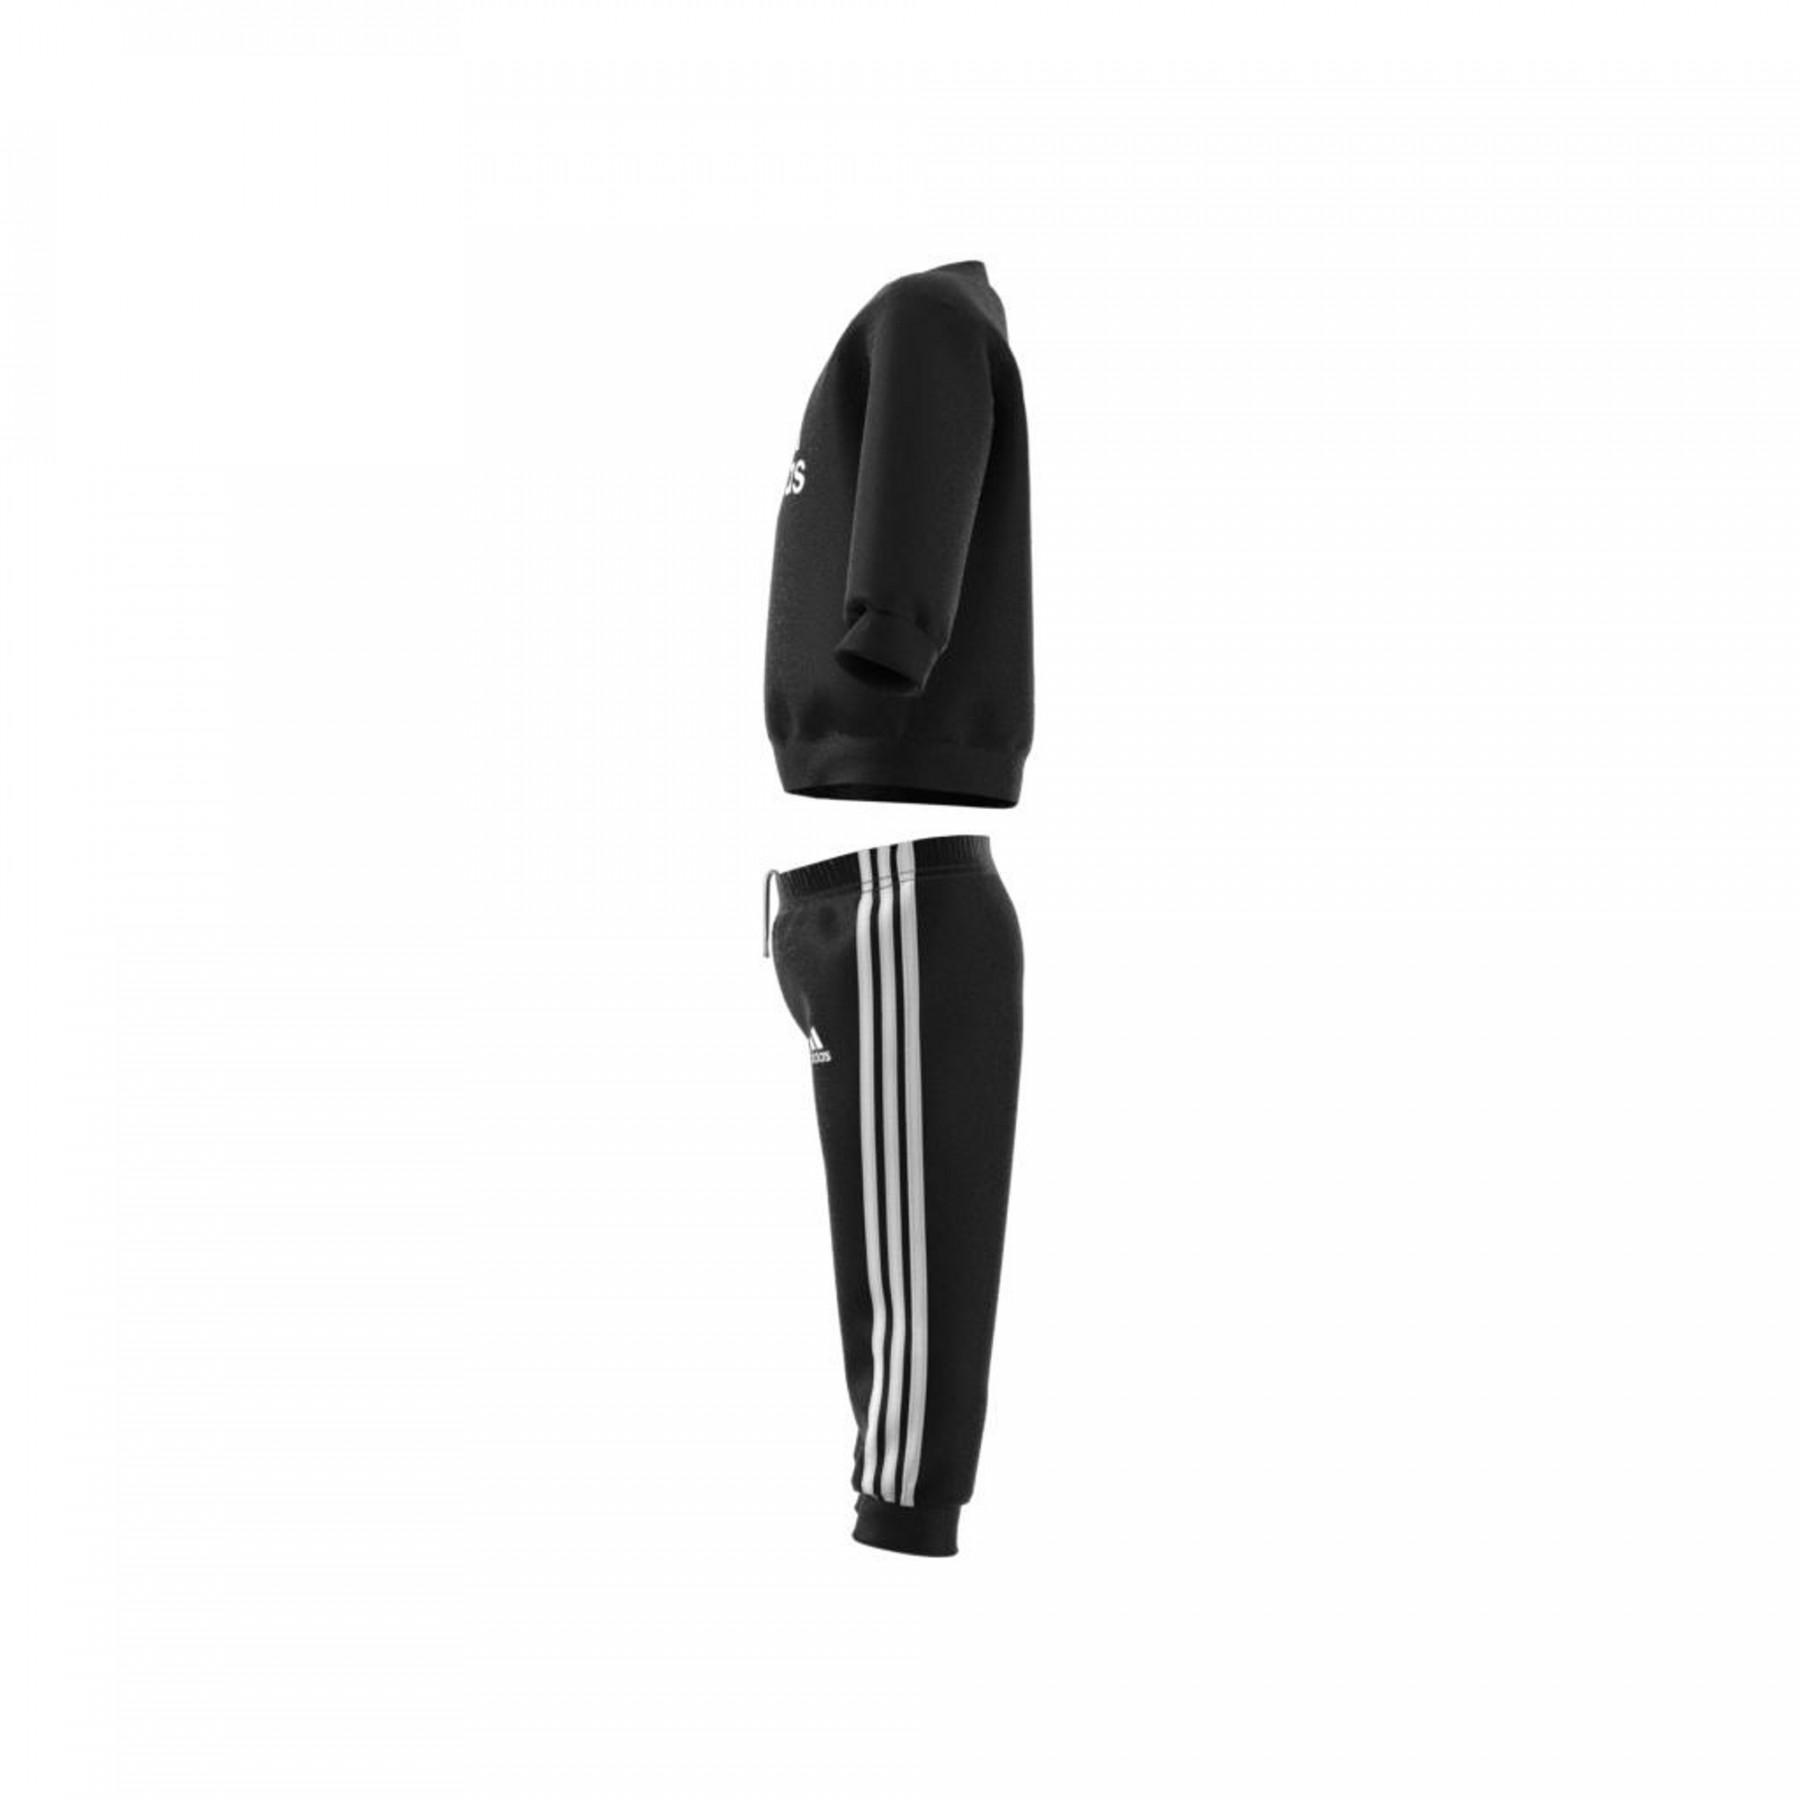 Completo sportivo per bambini Adidas Badge of Sport French Terry Jogger